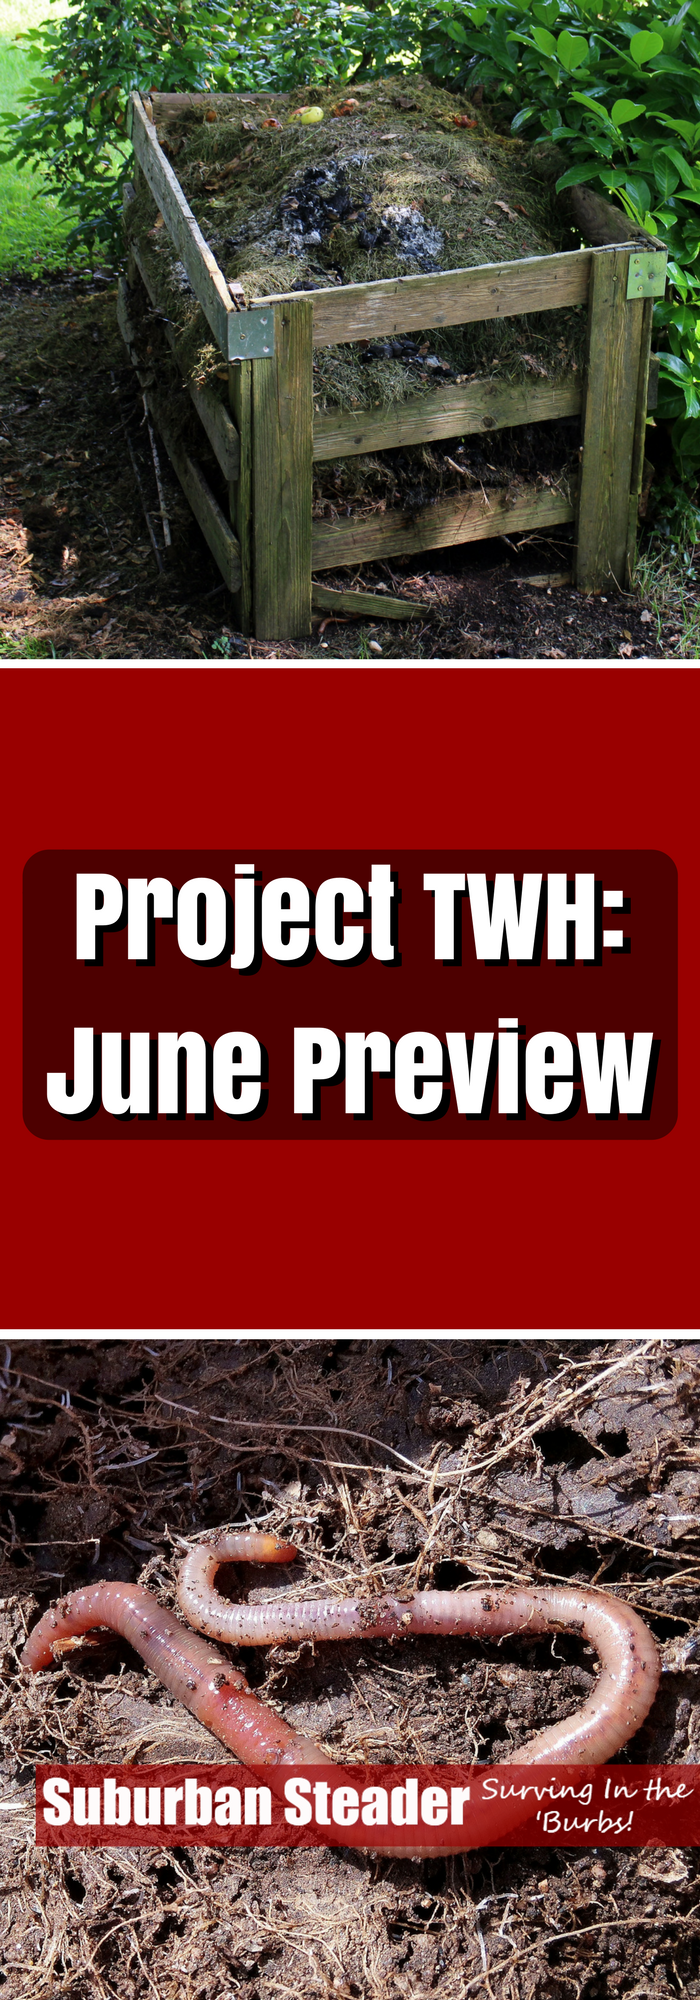 June Preview - Project TWH